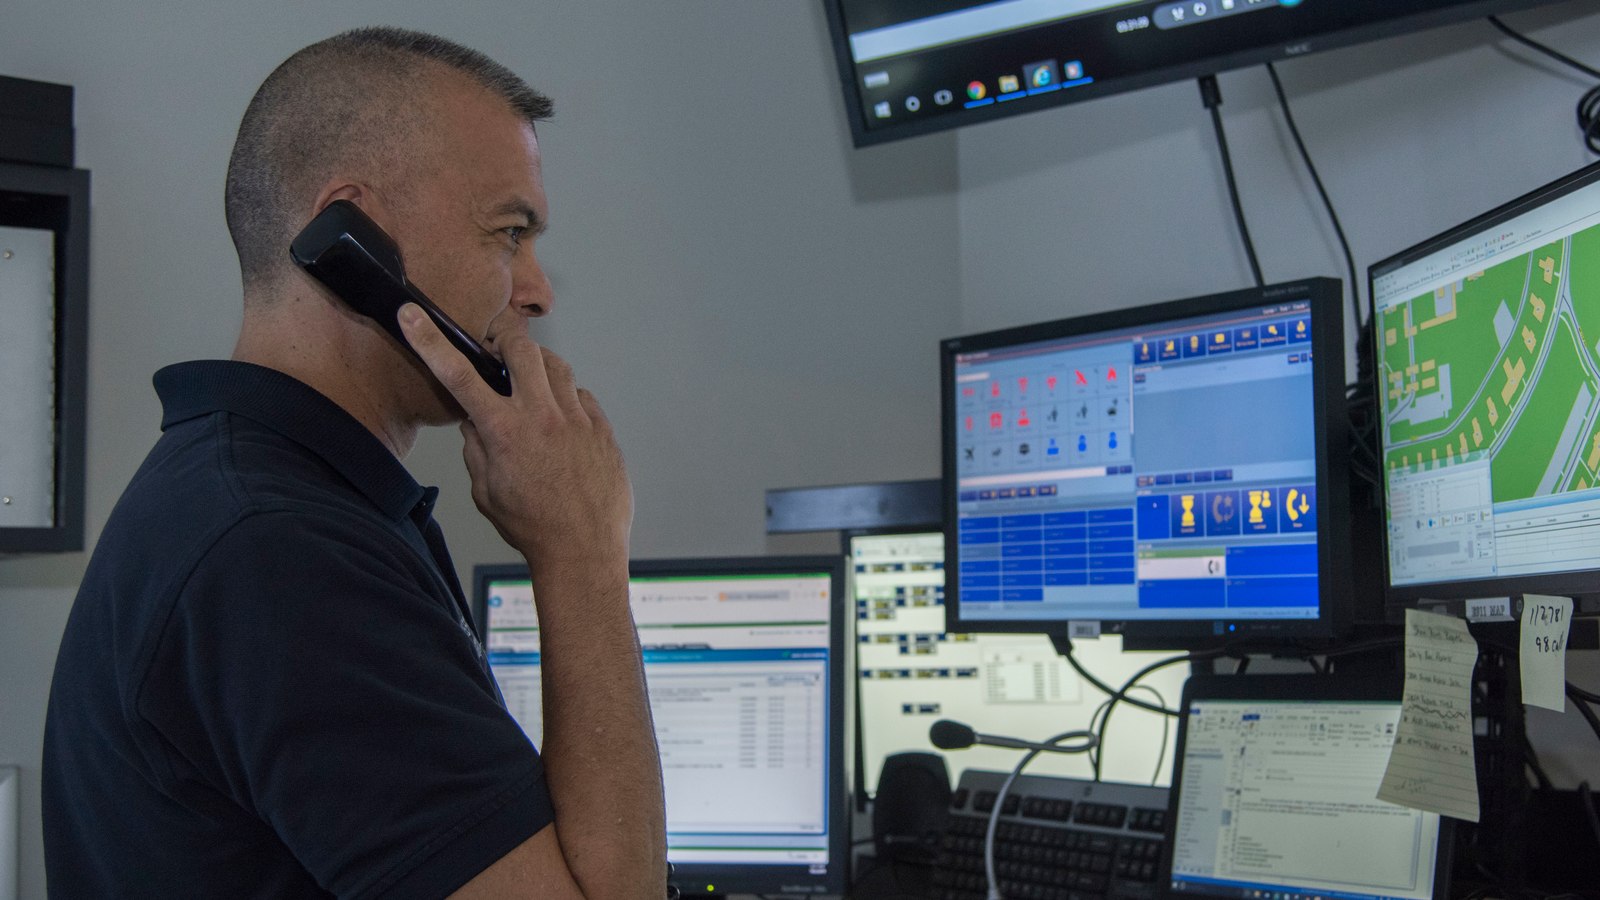 Steps to become a 911 Dispatcher